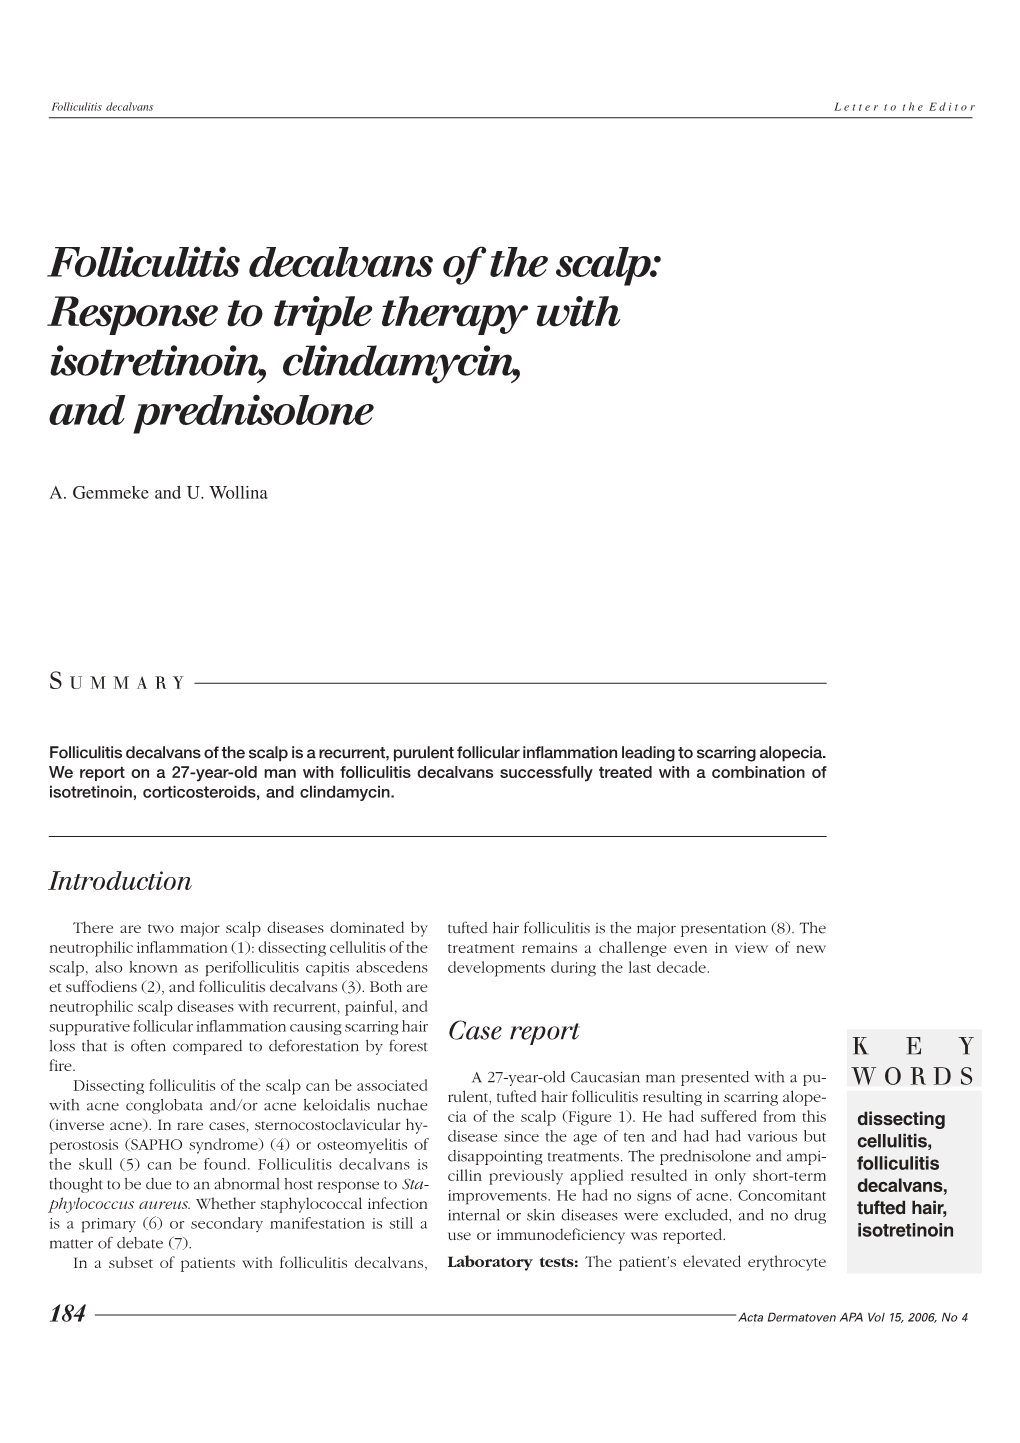 Folliculitis Decalvans of the Scalp: Response to Triple Therapy with Isotretinoin, Clindamycin, and Prednisolone